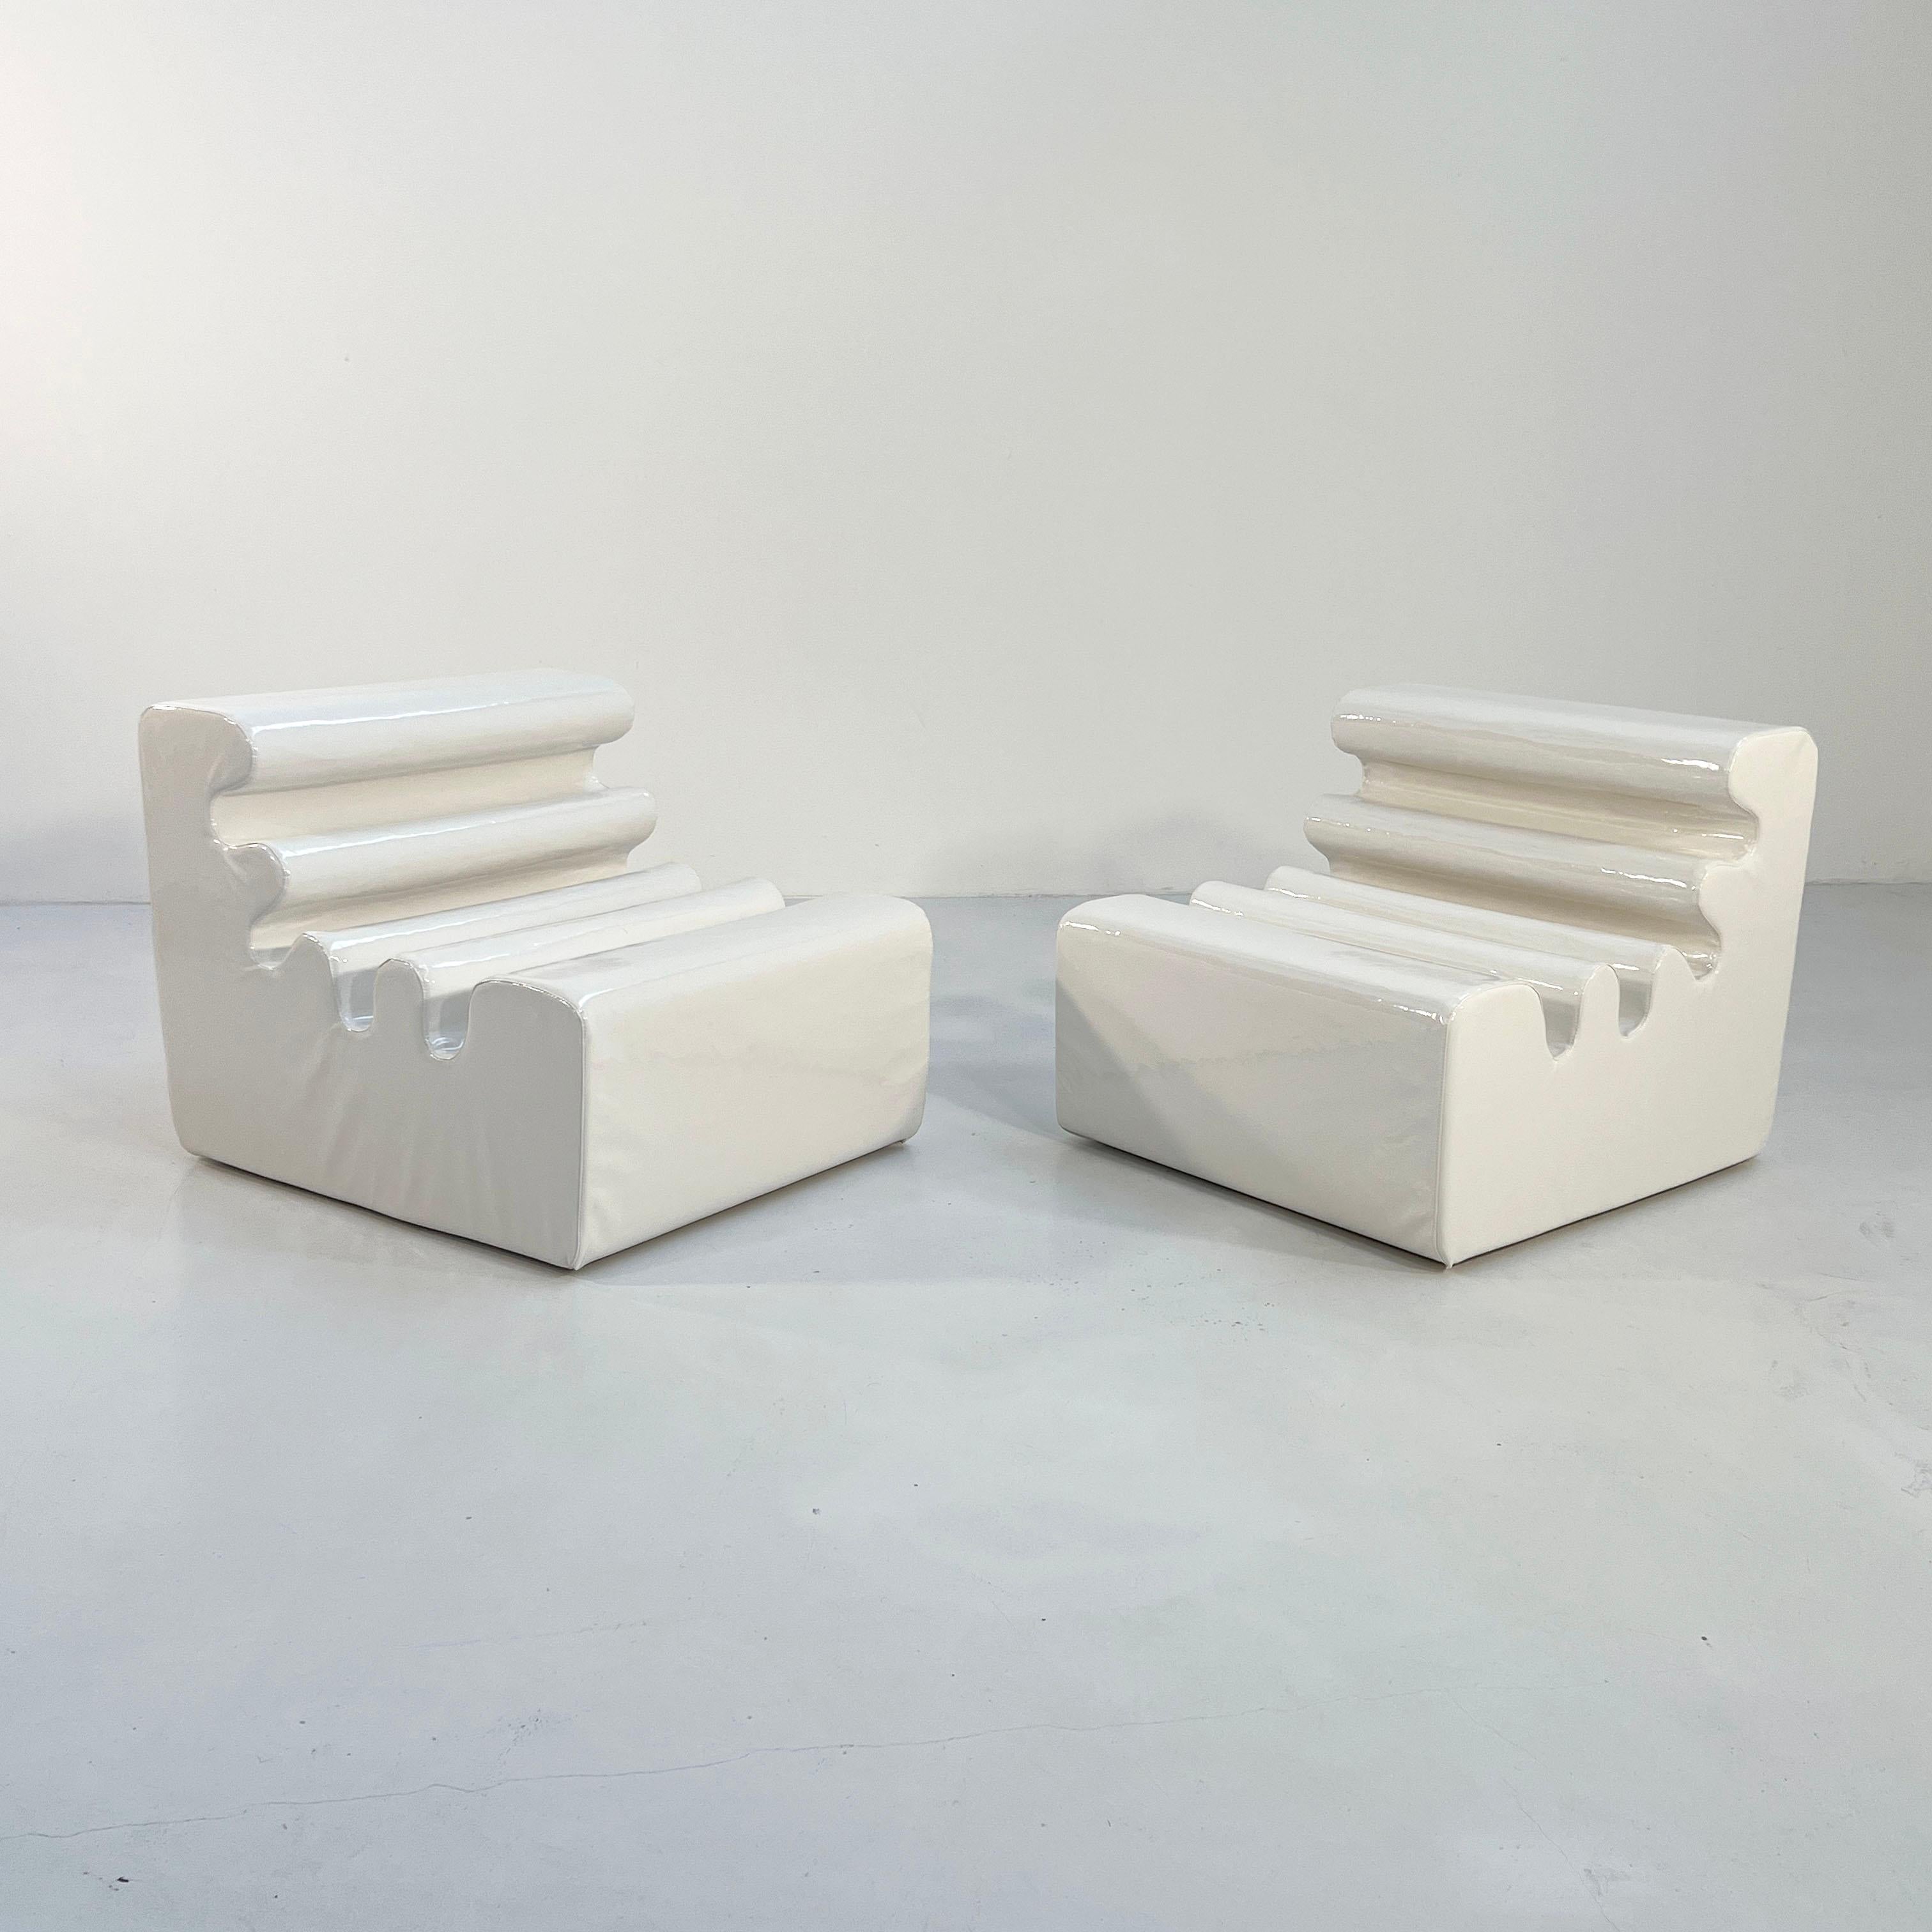 Pair of White Karelia Lounge Chairs by Liisi Beckmann for Zanotta, 1960s In Good Condition For Sale In Ixelles, Bruxelles